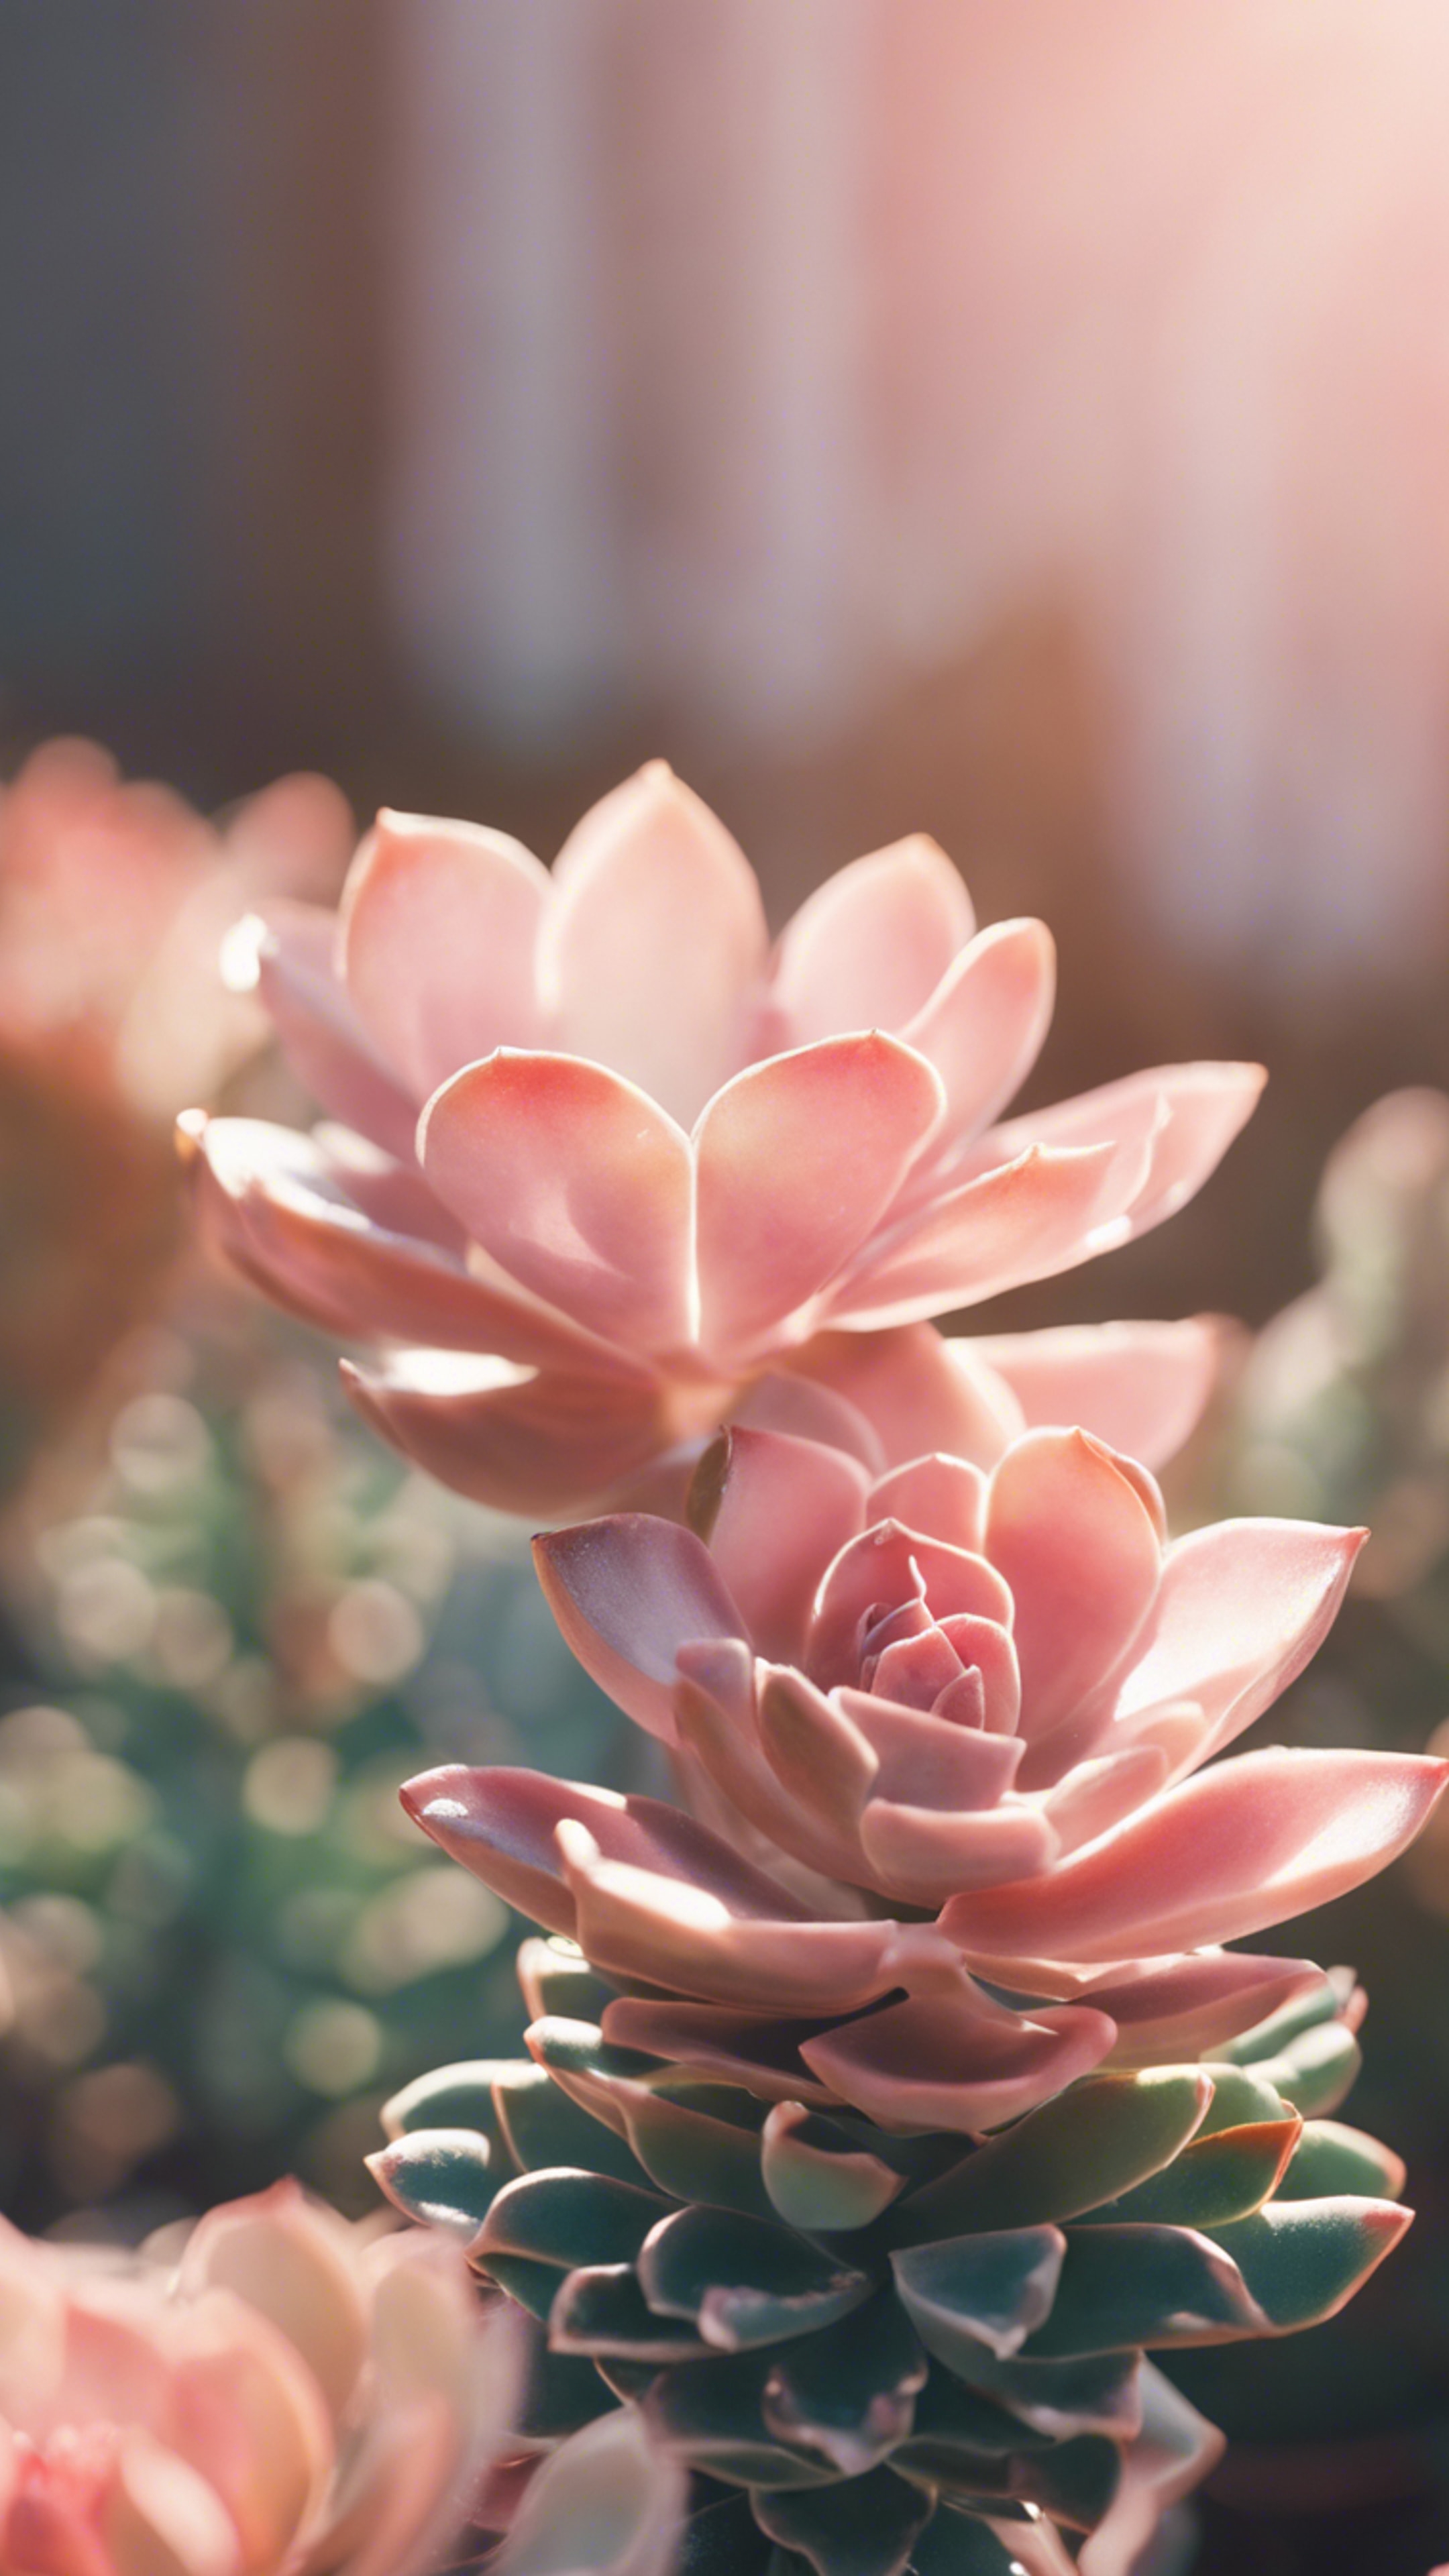 A close-up view of a preppy pastel pink succulent plant bathed in gentle morning sunshine. Wallpaper[96679d4148894c129b05]